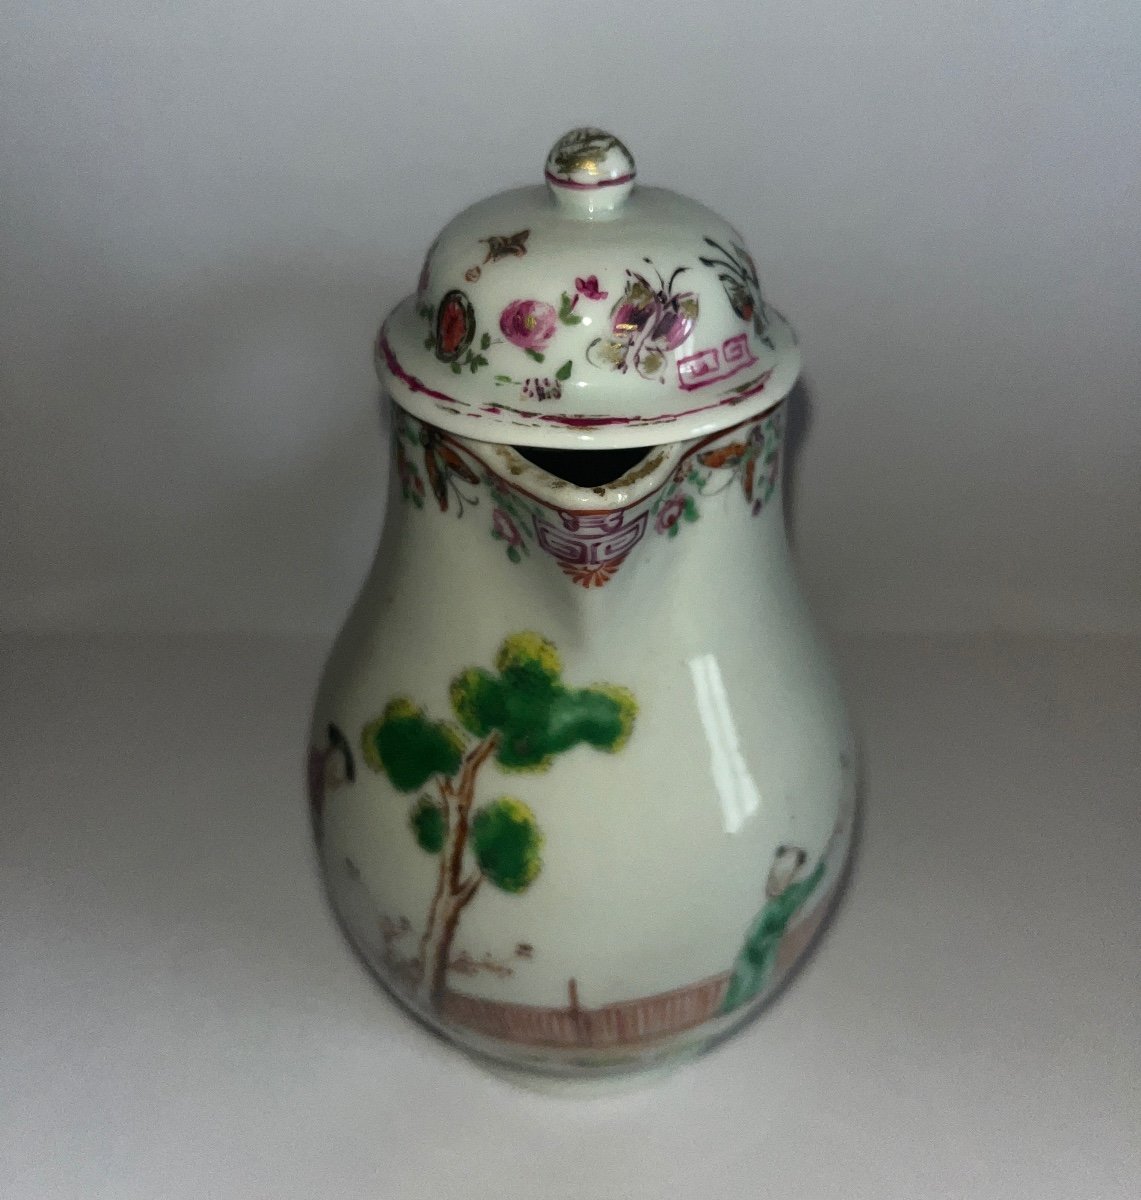 Creamer Compagnie Des Indes  With Chinese Decor From The End Of 17th Century, Beginning Of The 18th Century-photo-3